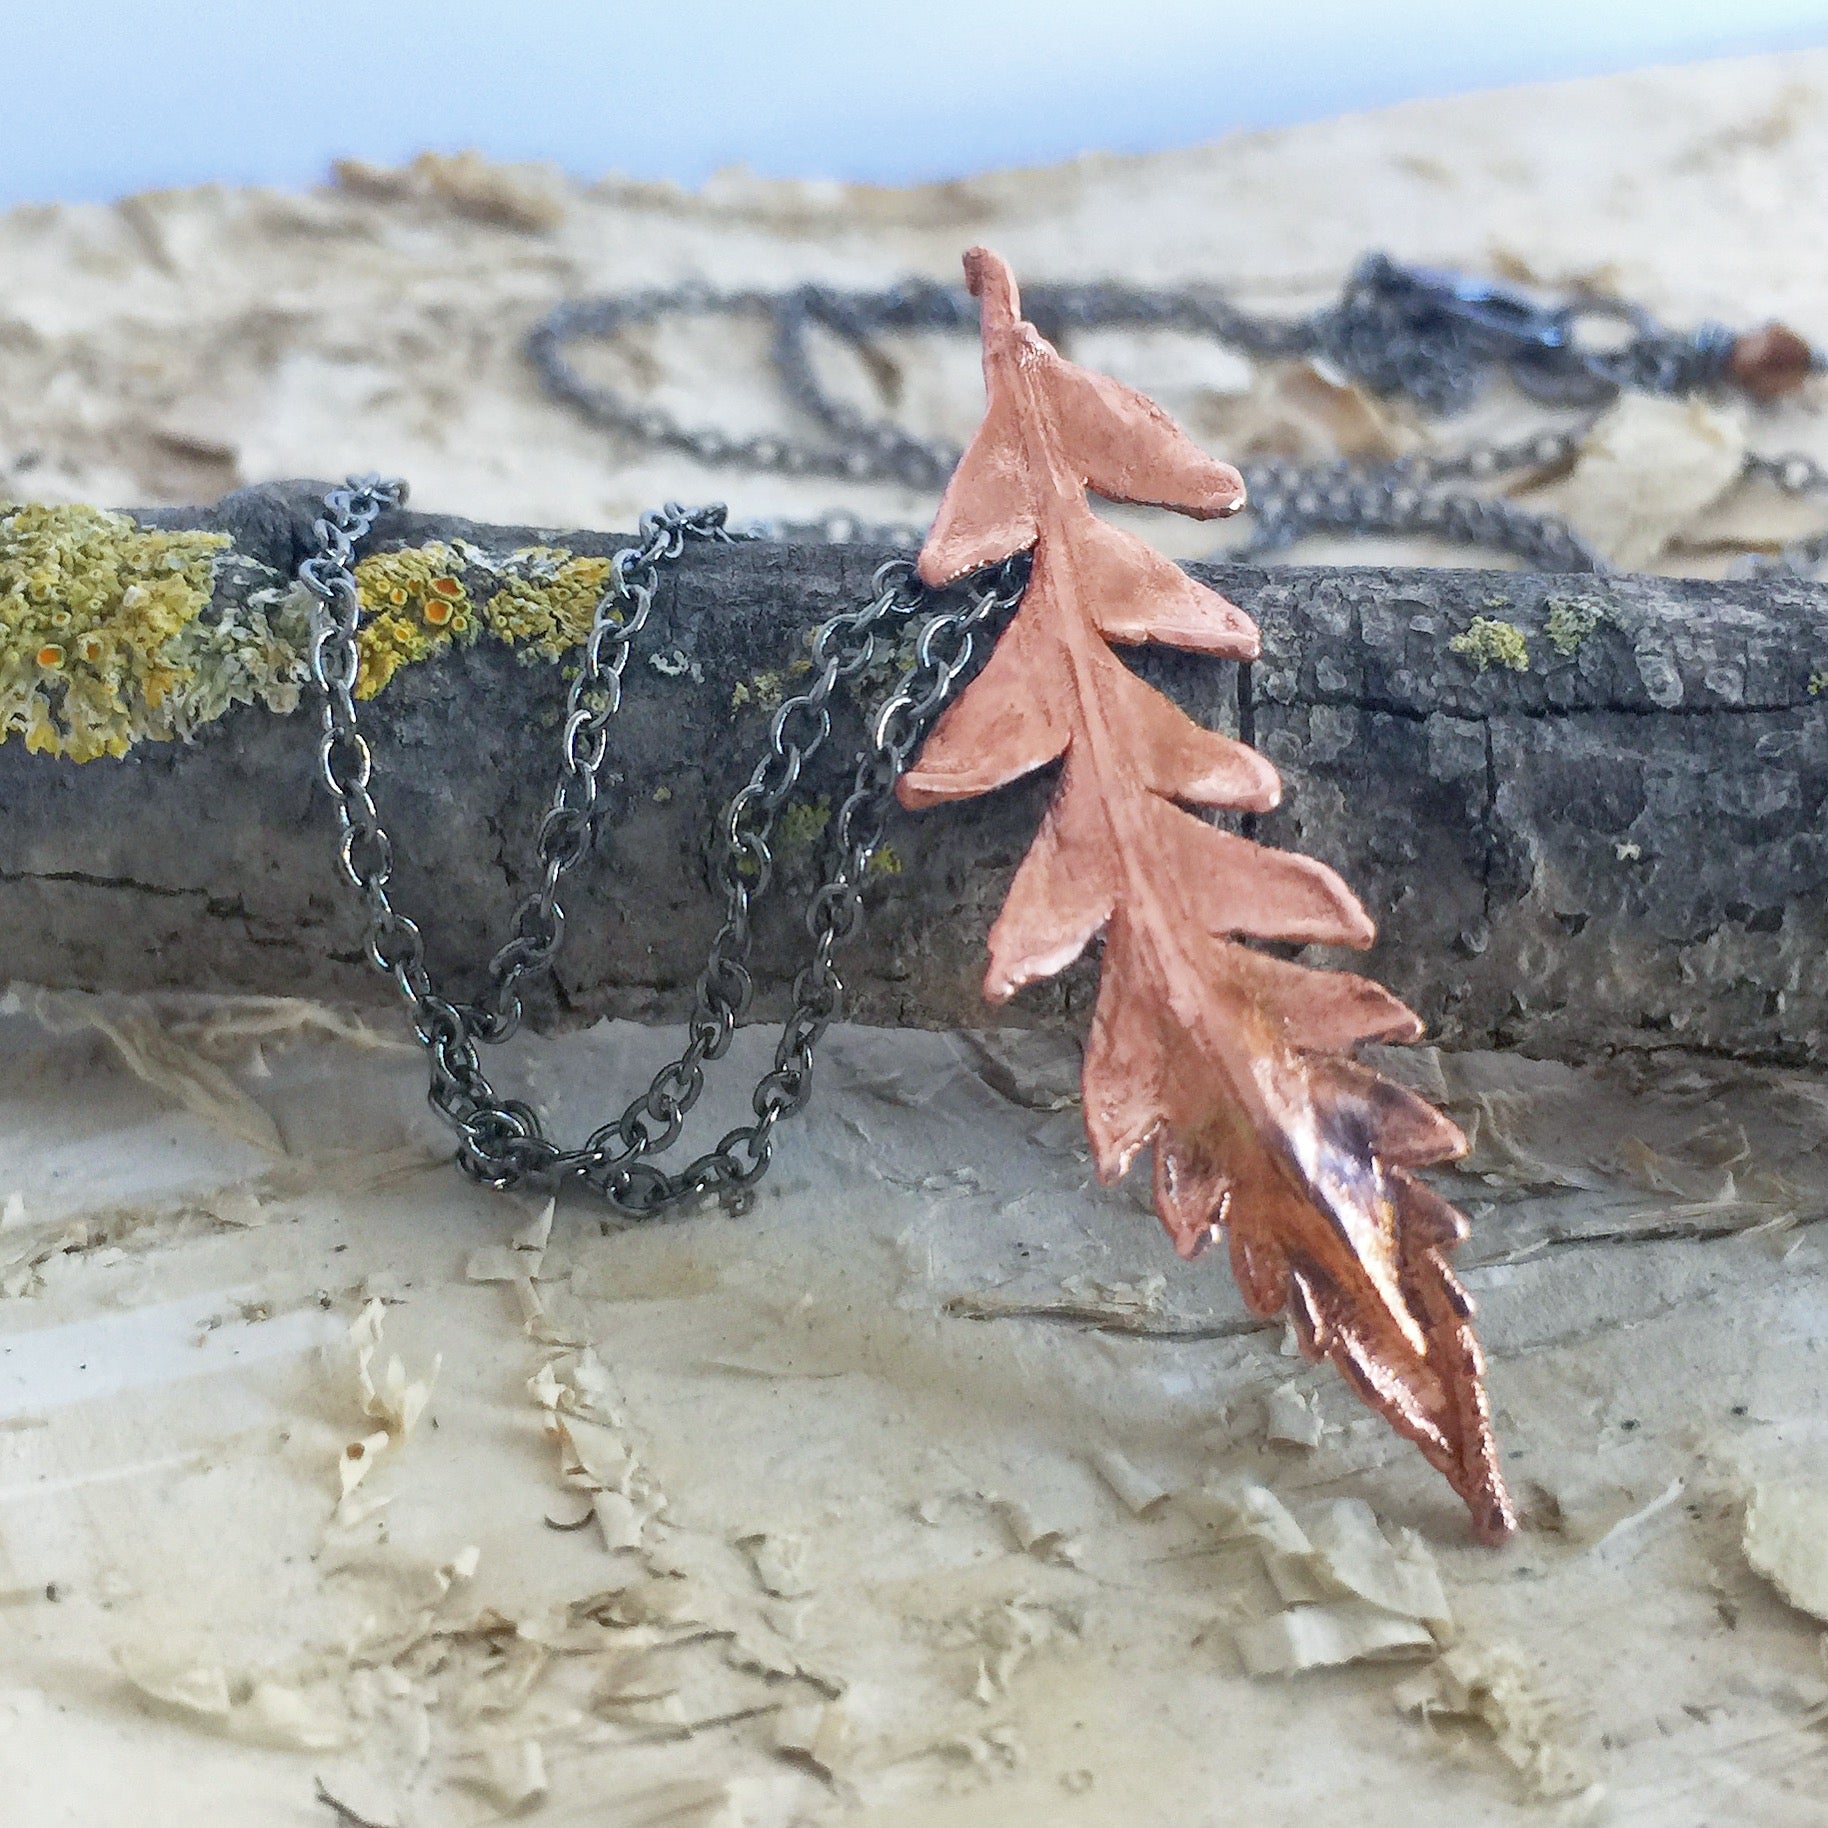 Copper Fern Necklace | Electroformed Nature | Real Fern Pendant | Woodland Jewelry *PREORDER ONLY* - Enchanted Leaves - Nature Jewelry - Unique Handmade Gifts